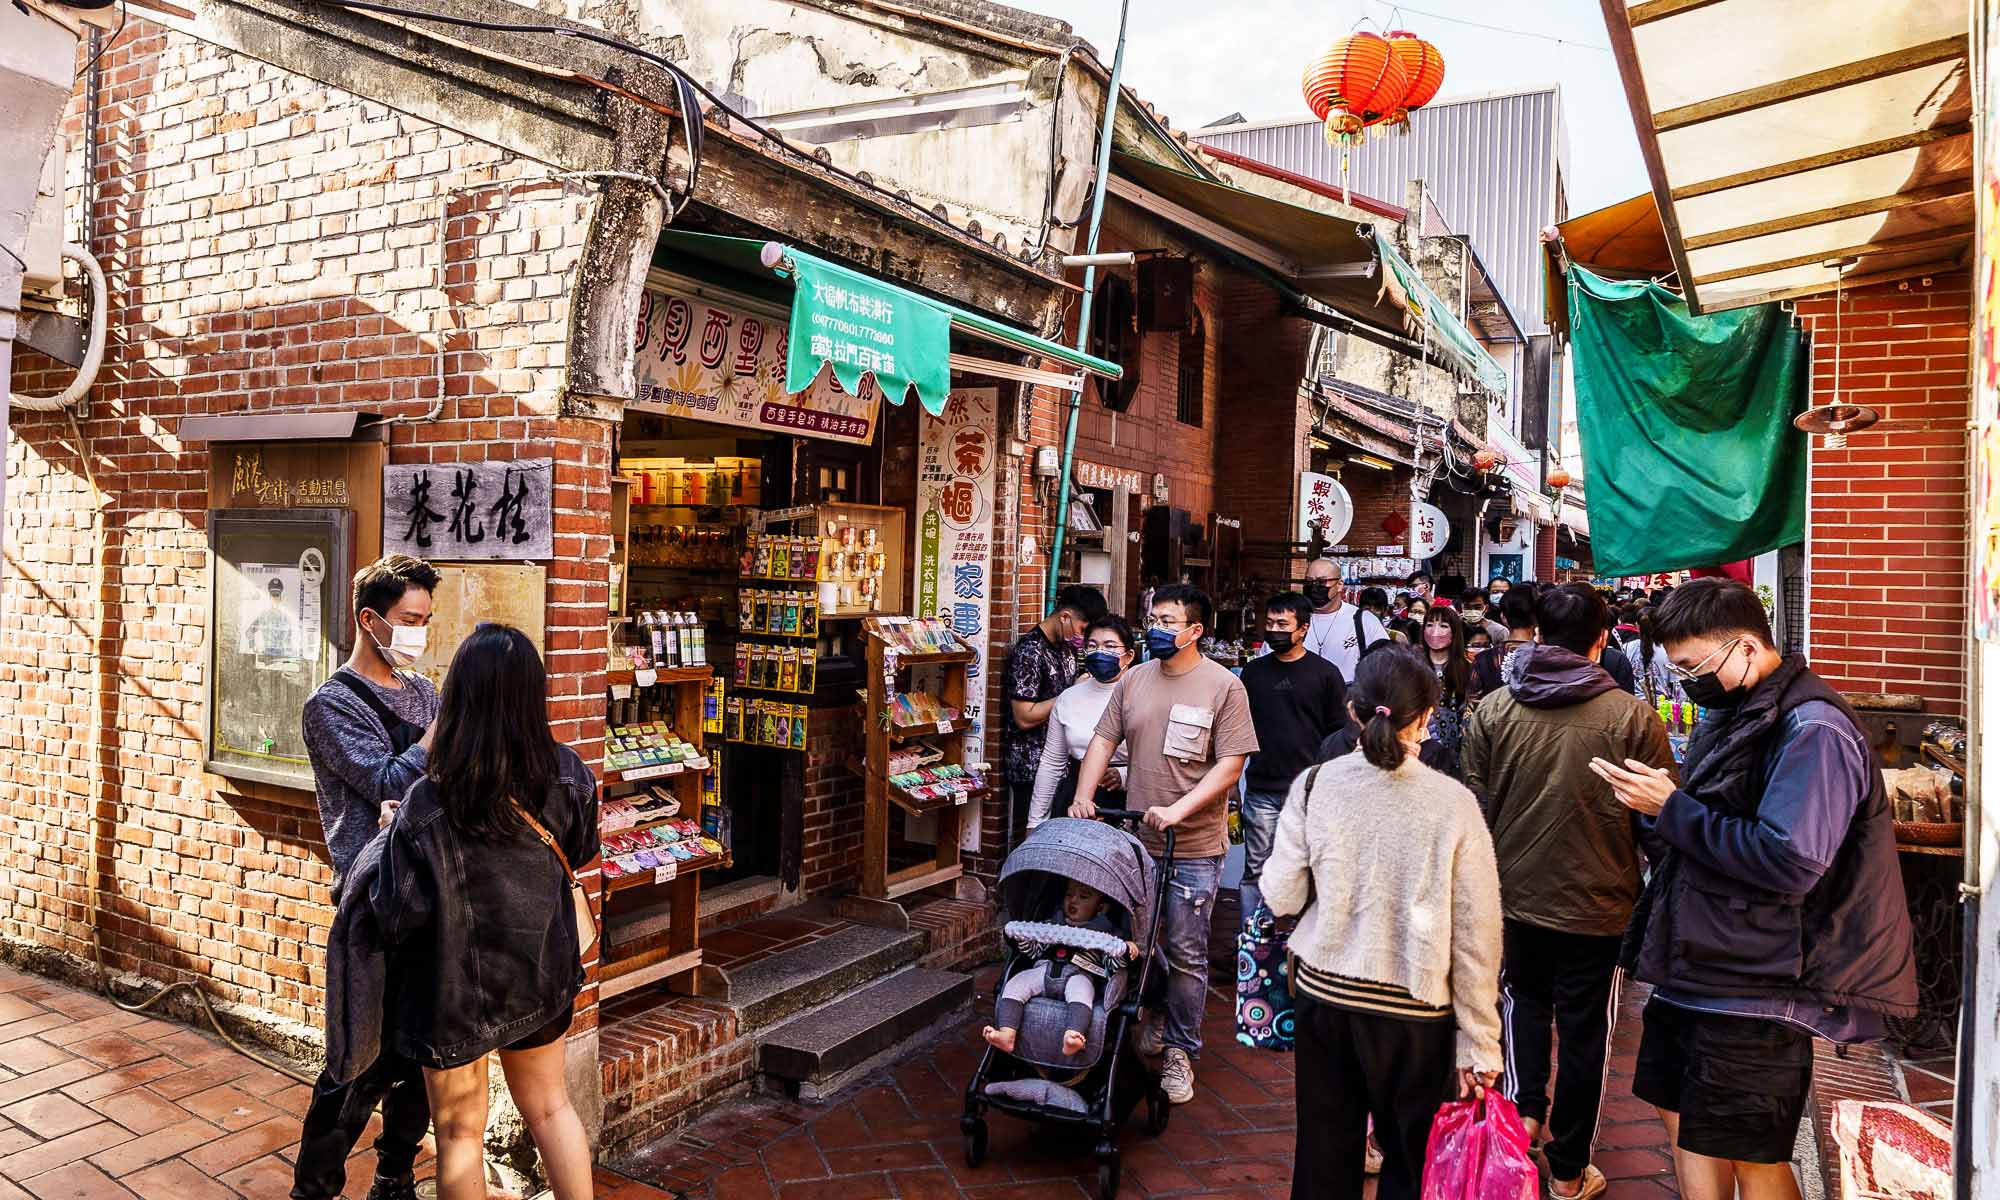 Crowds walk through a busy narrow alley made of red bricks in Lukang Old Street.